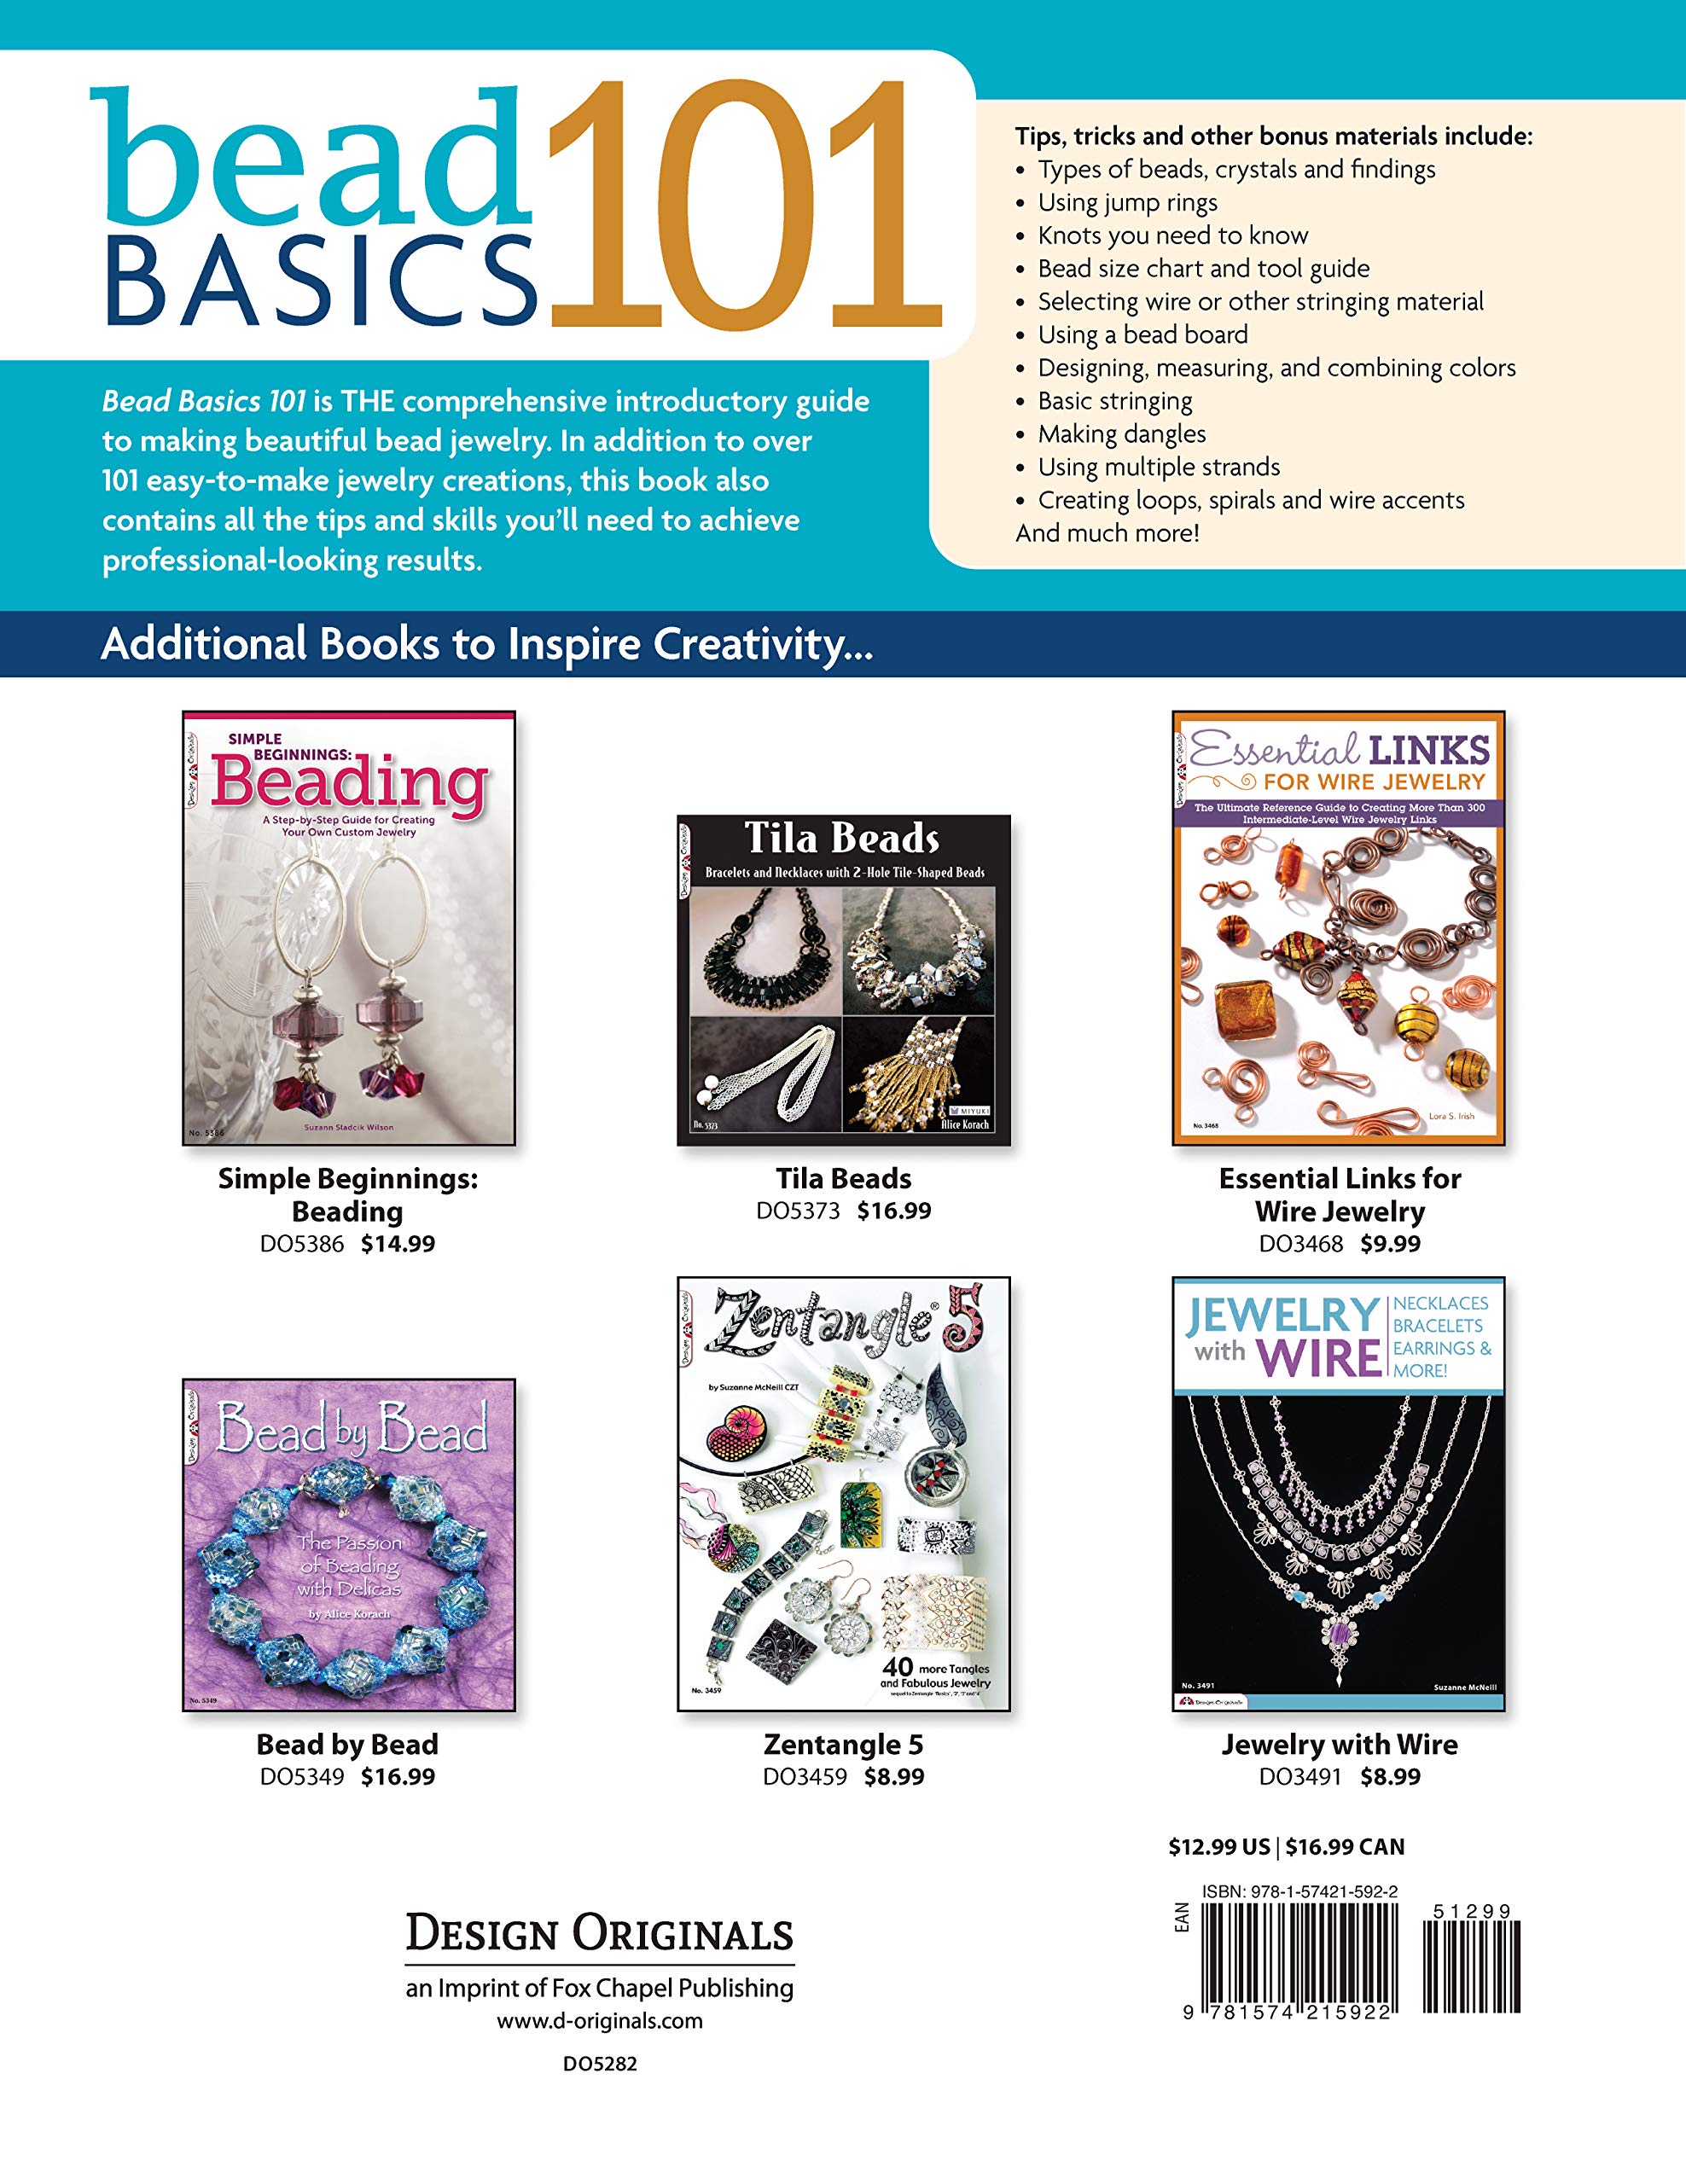 Bead Basics 101: All You Need To Know About Stringing, Findings, Tools (Design Originals) Beading Details on Clasps, Knots, Jump Rings, Bead Sizing, Wire, Using a Bead Board, Spirals, Dangles, & More